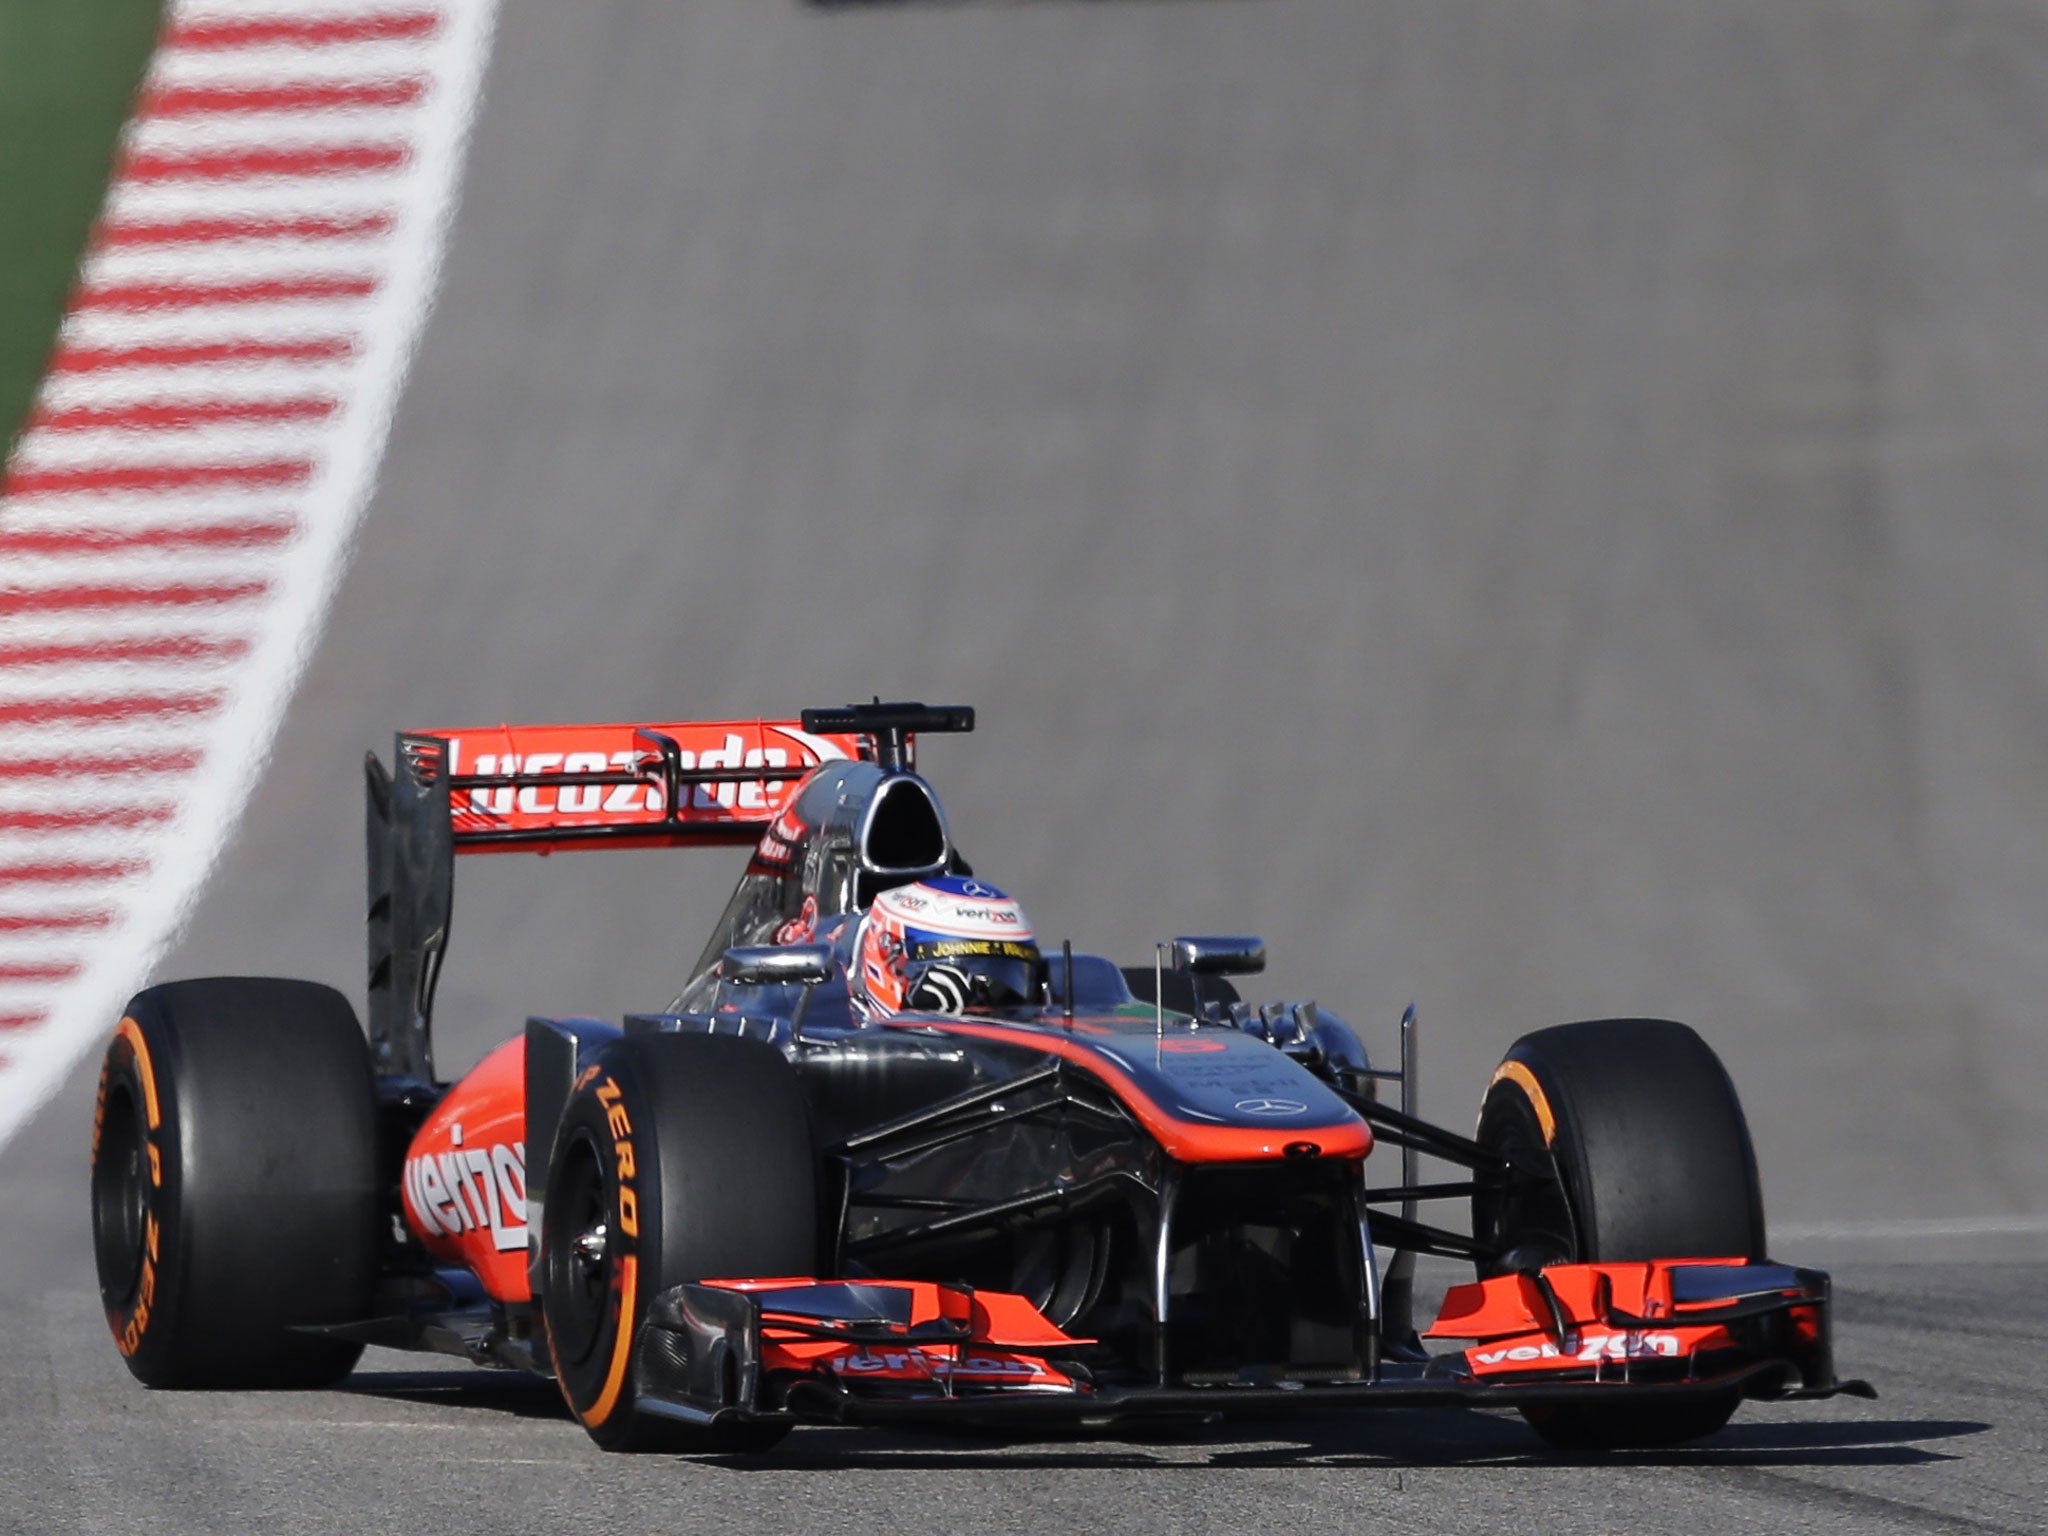 Jenson Button sets the early pace yesterday in practice for tomorrow’s US Grand Prix